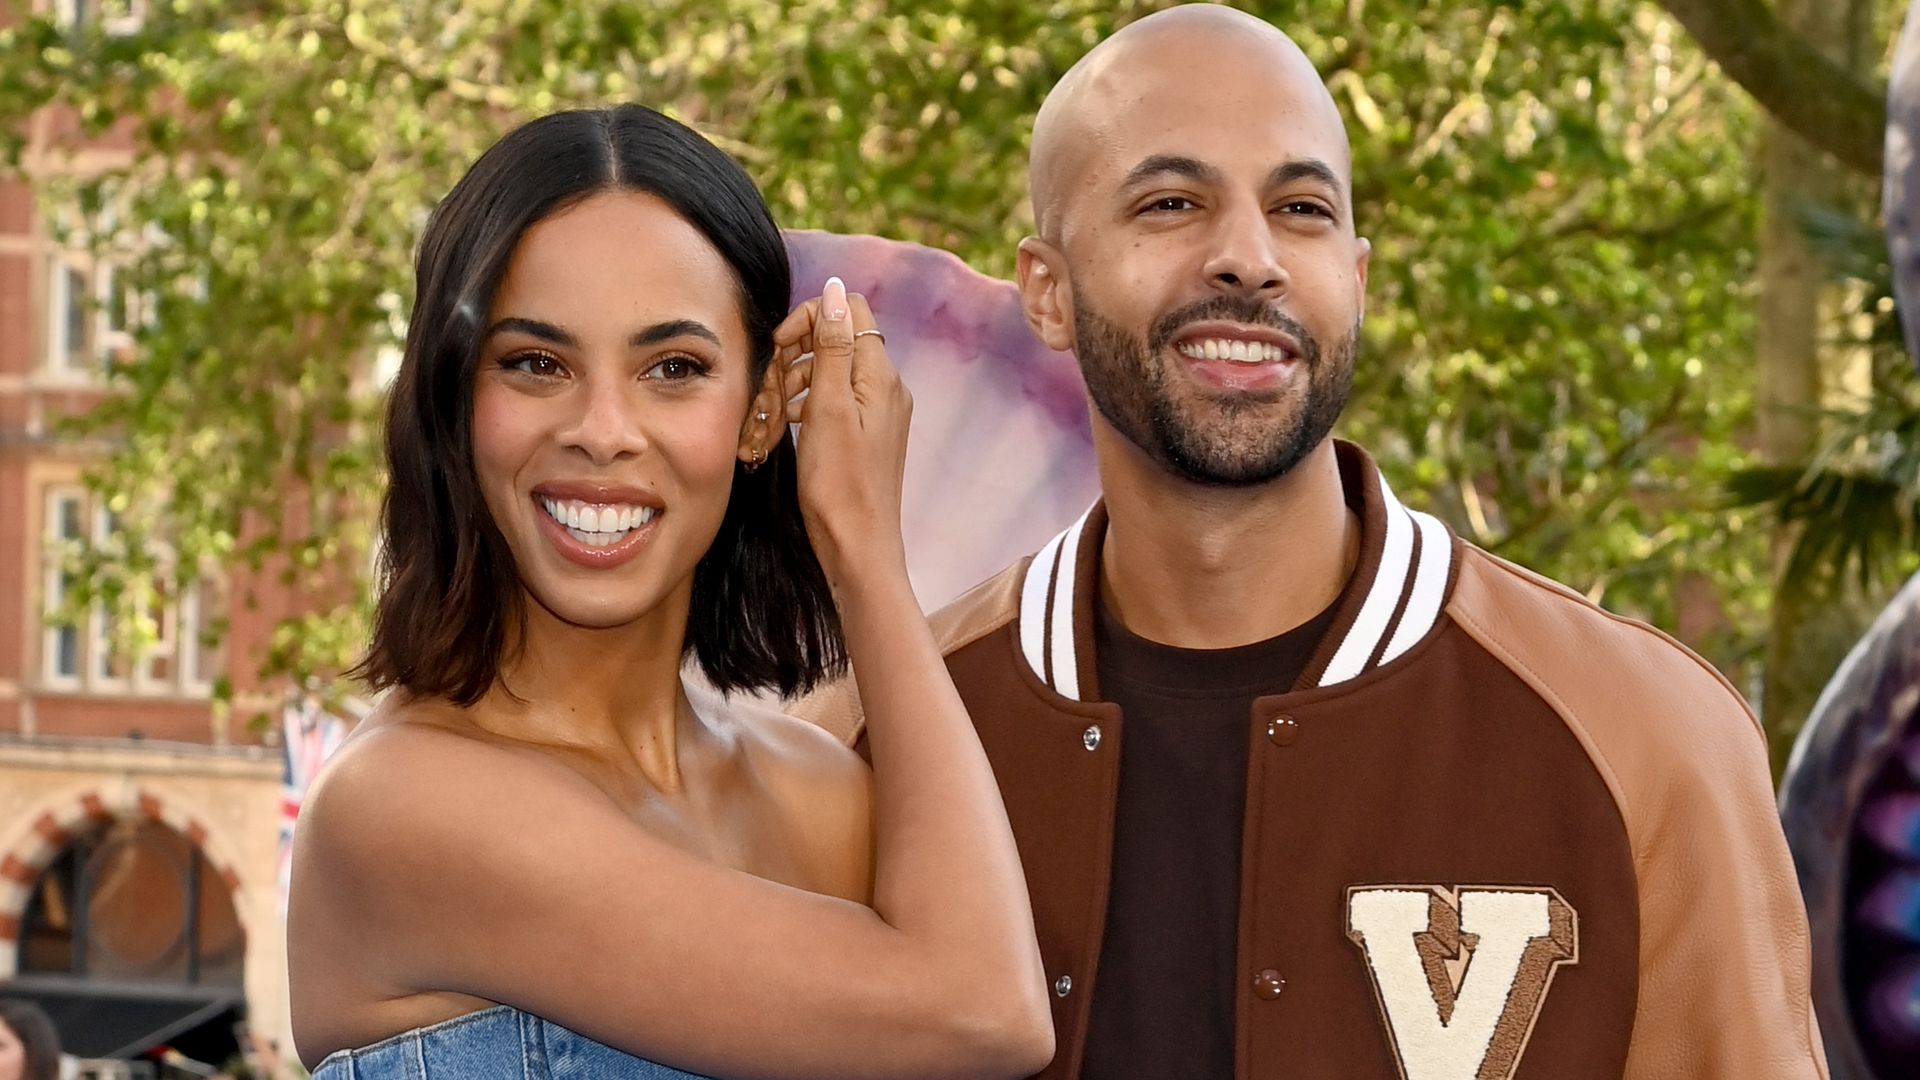 Rochelle Humes and Marvin Humes attend the UK Premiere of "The Little Mermaid" at Odeon Luxe Leicester Square on May 15, 2023 in London